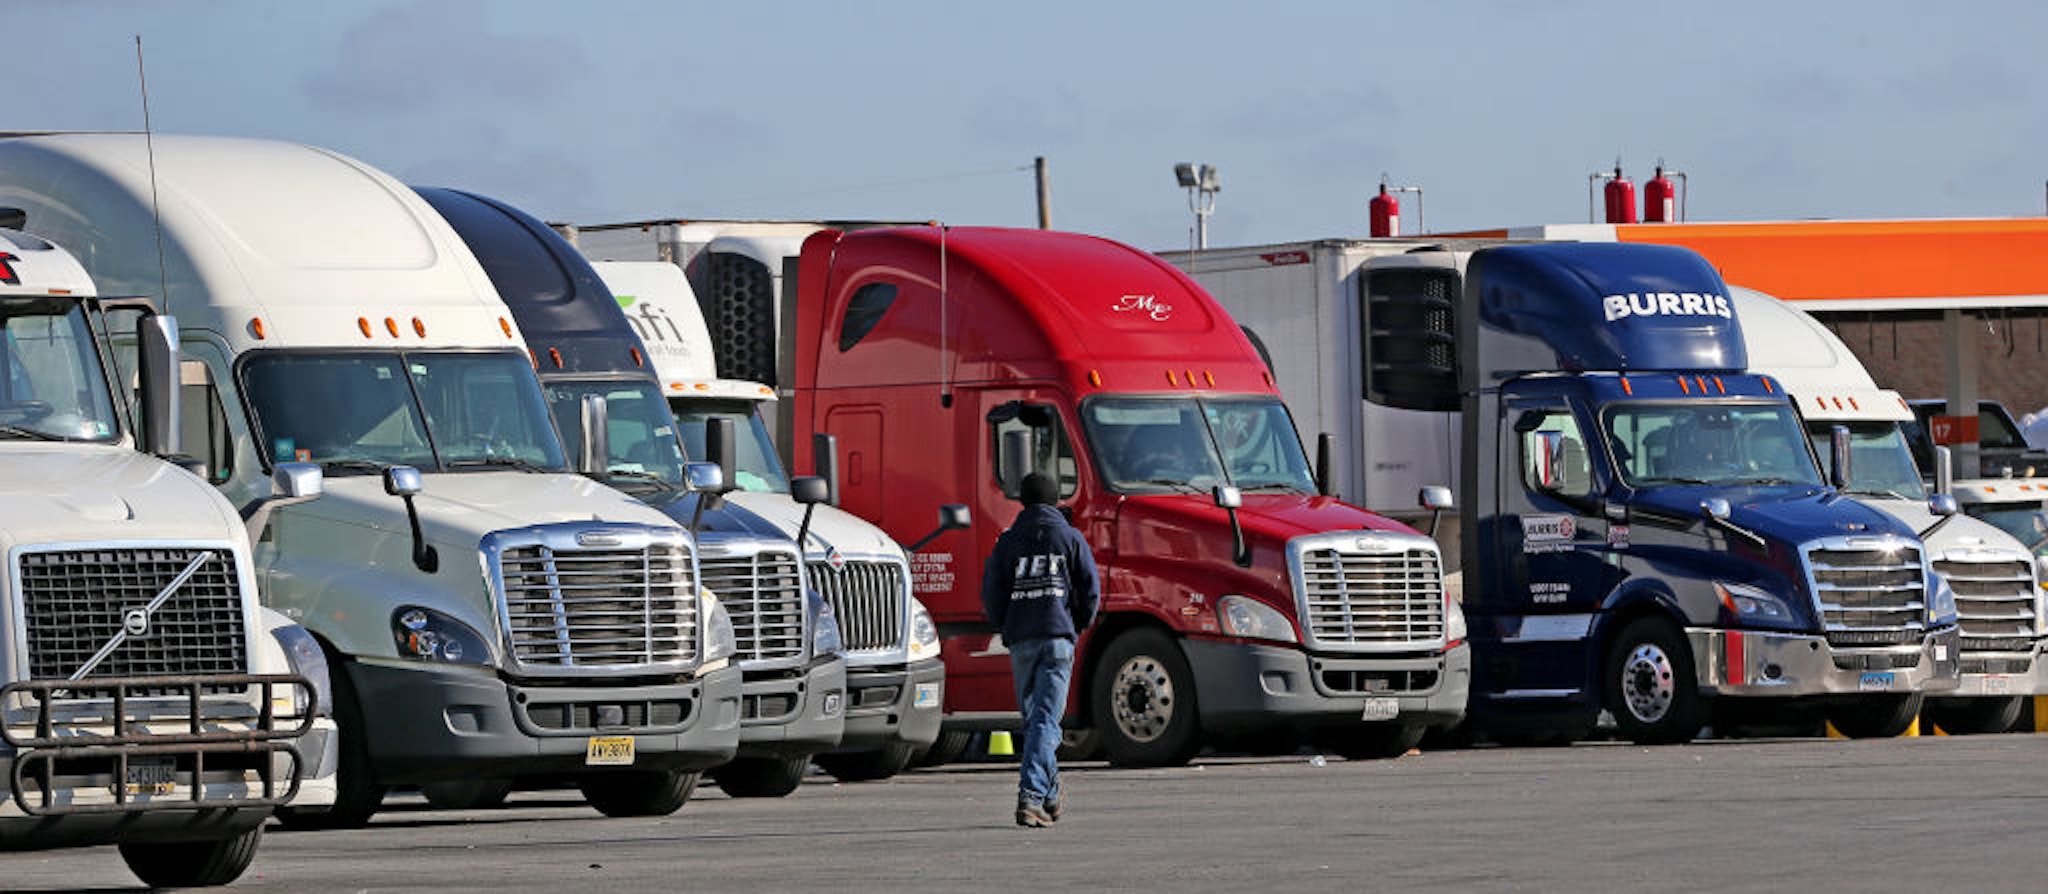 Truck drivers take a rest at the Westborough Service Plaza in Westborough, MA along the Massachusetts Turnpike on March 26, 2020. Even as the COVID-19 pandemic has forced a majority of people to work from home, most of the nations 3.5 million drivers have kept rolling, trying to mitigate unprecedented supply chain disruptions by continuing to move goods around the nation. (Photo by David L. Ryan/The Boston Globe via Getty Images)